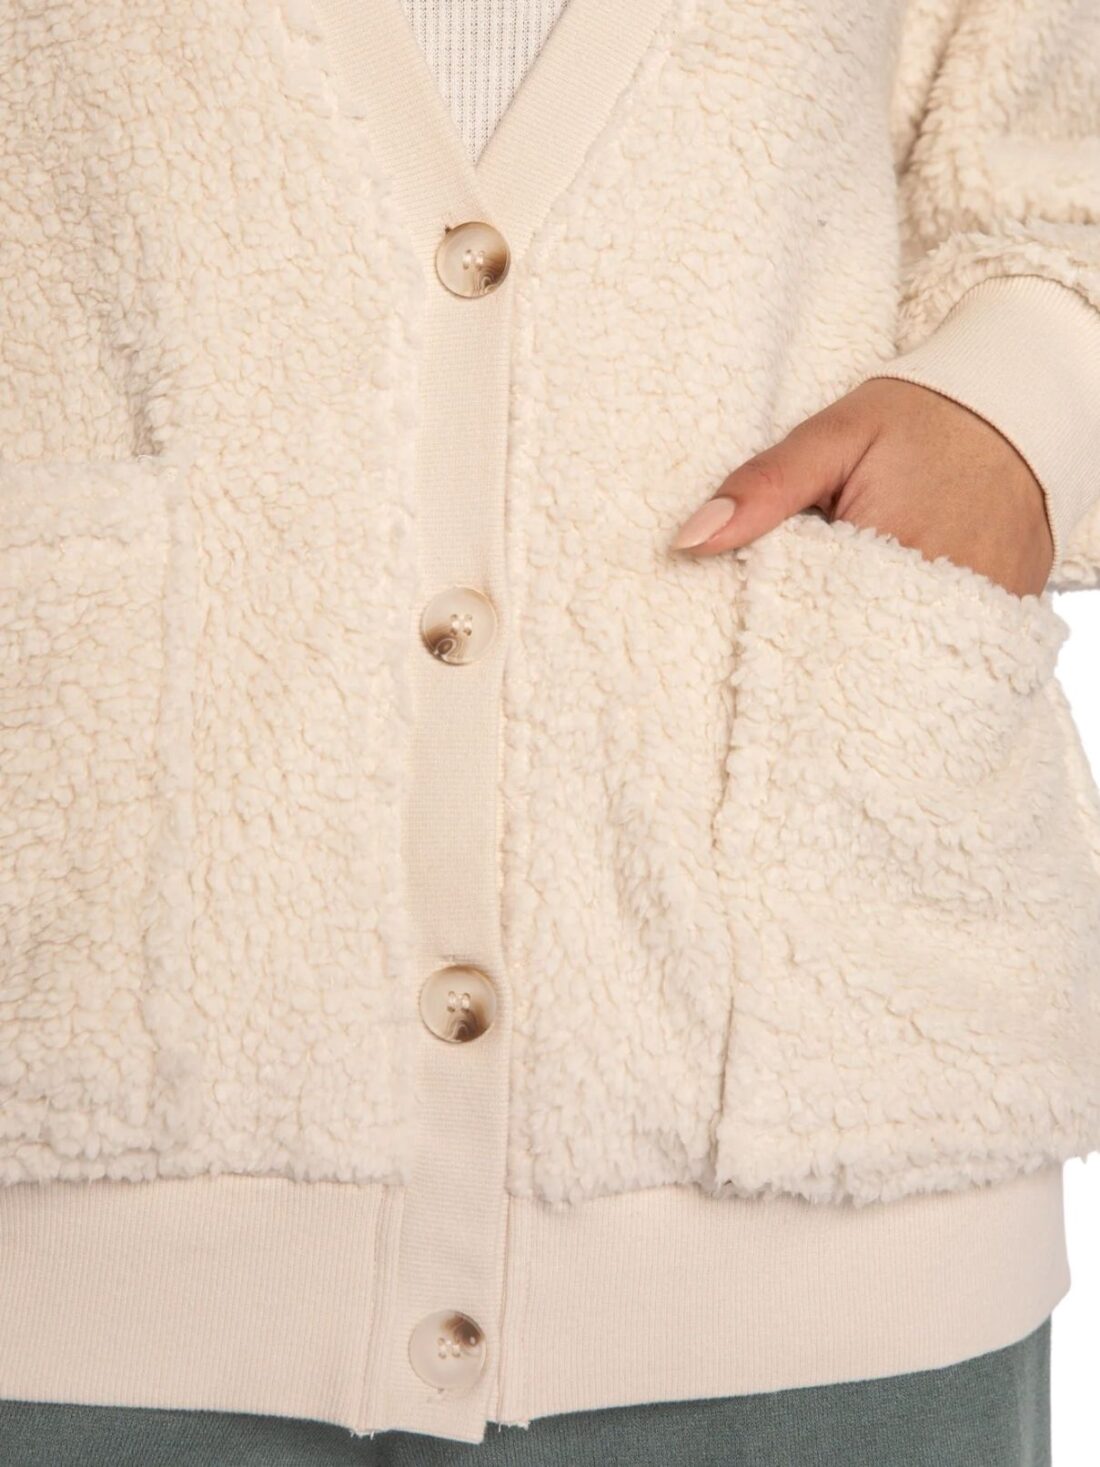 pj salvage cardigan shearling sweater in ivory